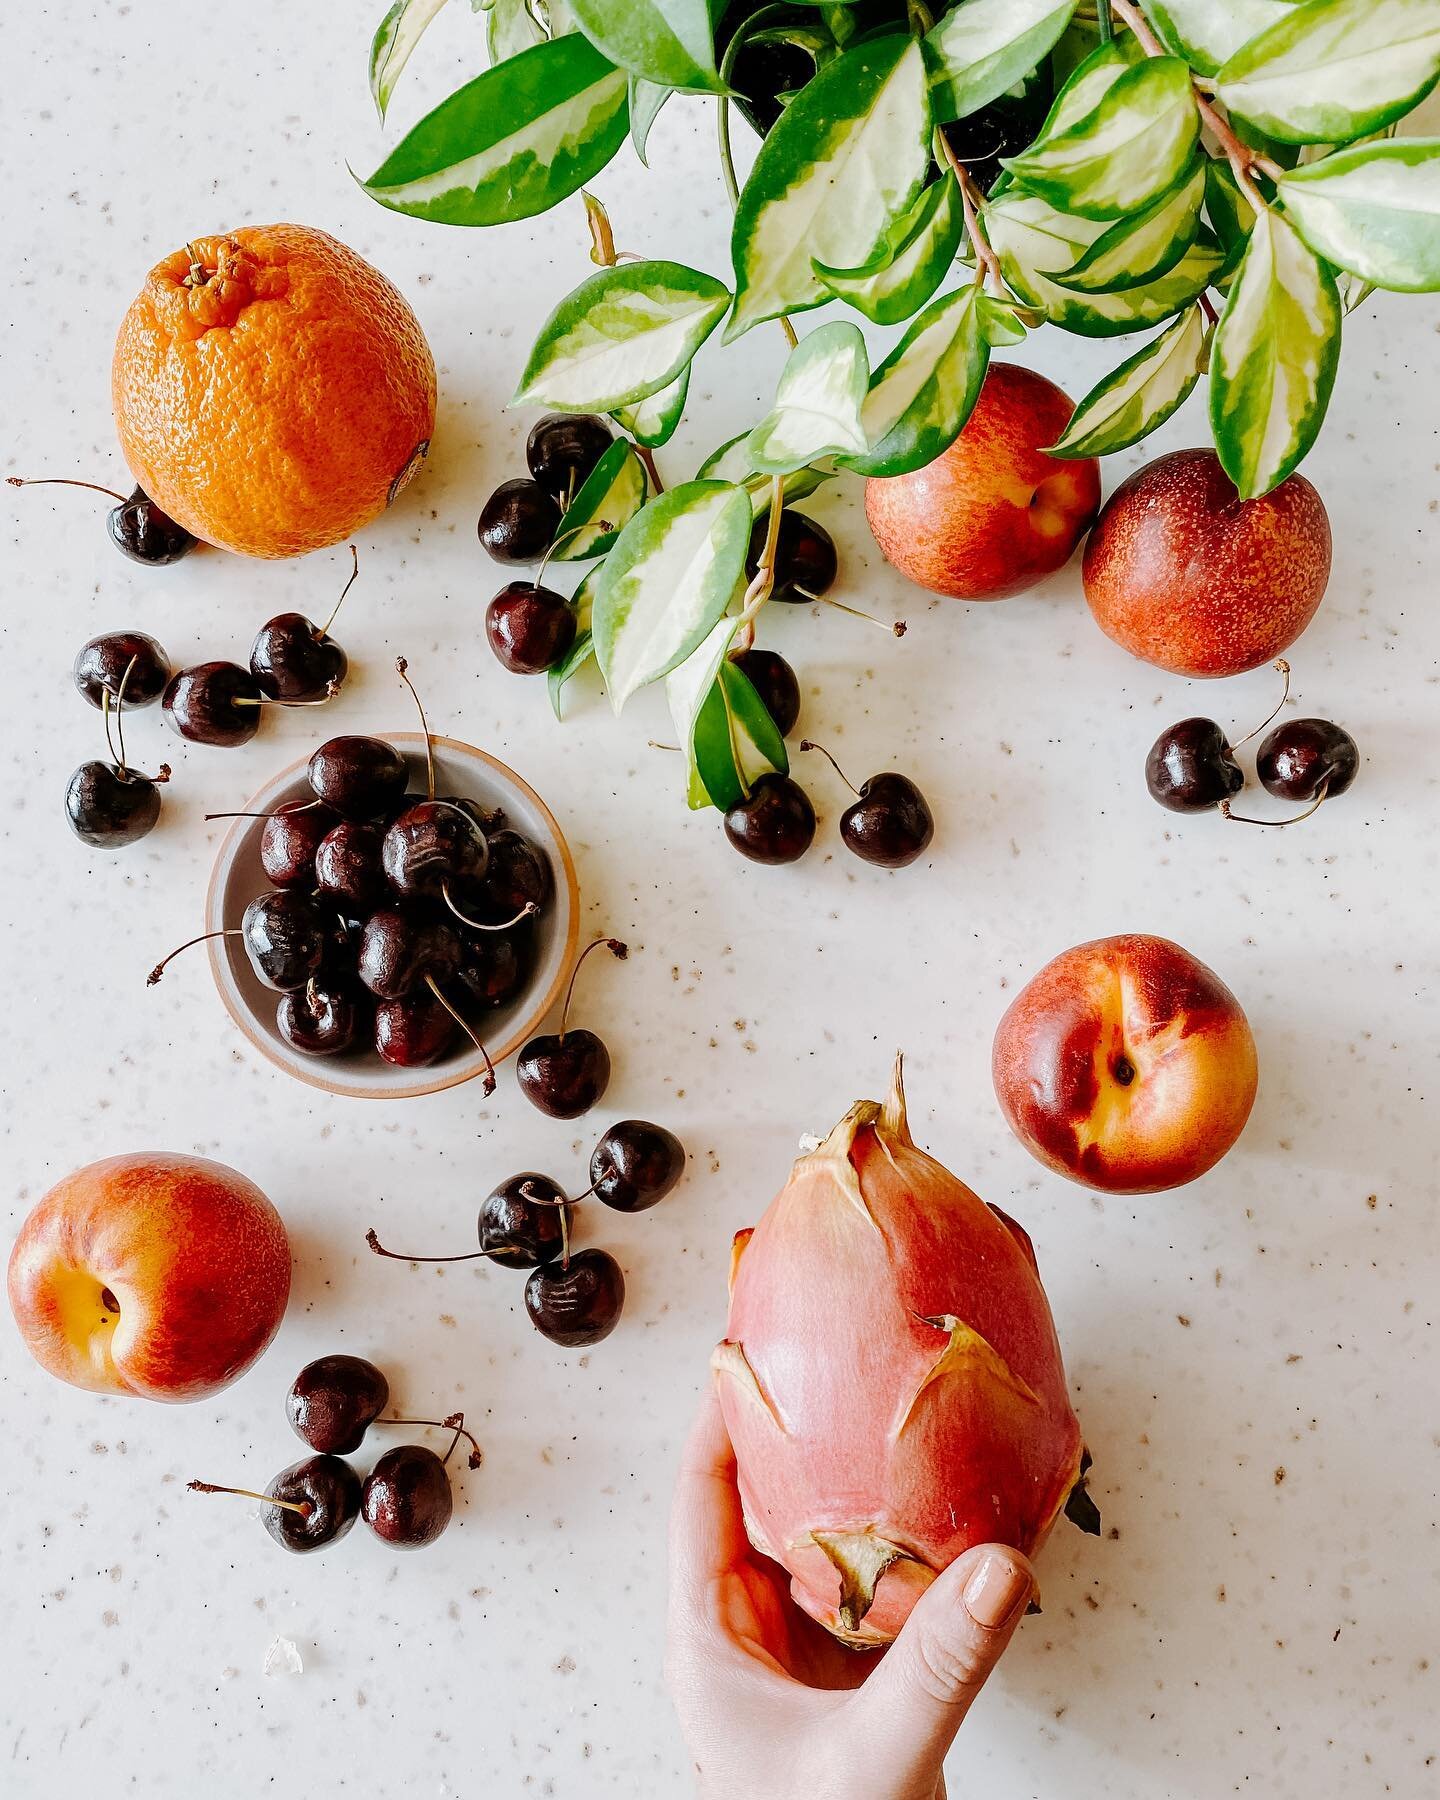 Cherries, sumo mandarins, nectarines, dragon fruit are all among some delicious tropical goodness we&rsquo;ve got the market this week! ✨